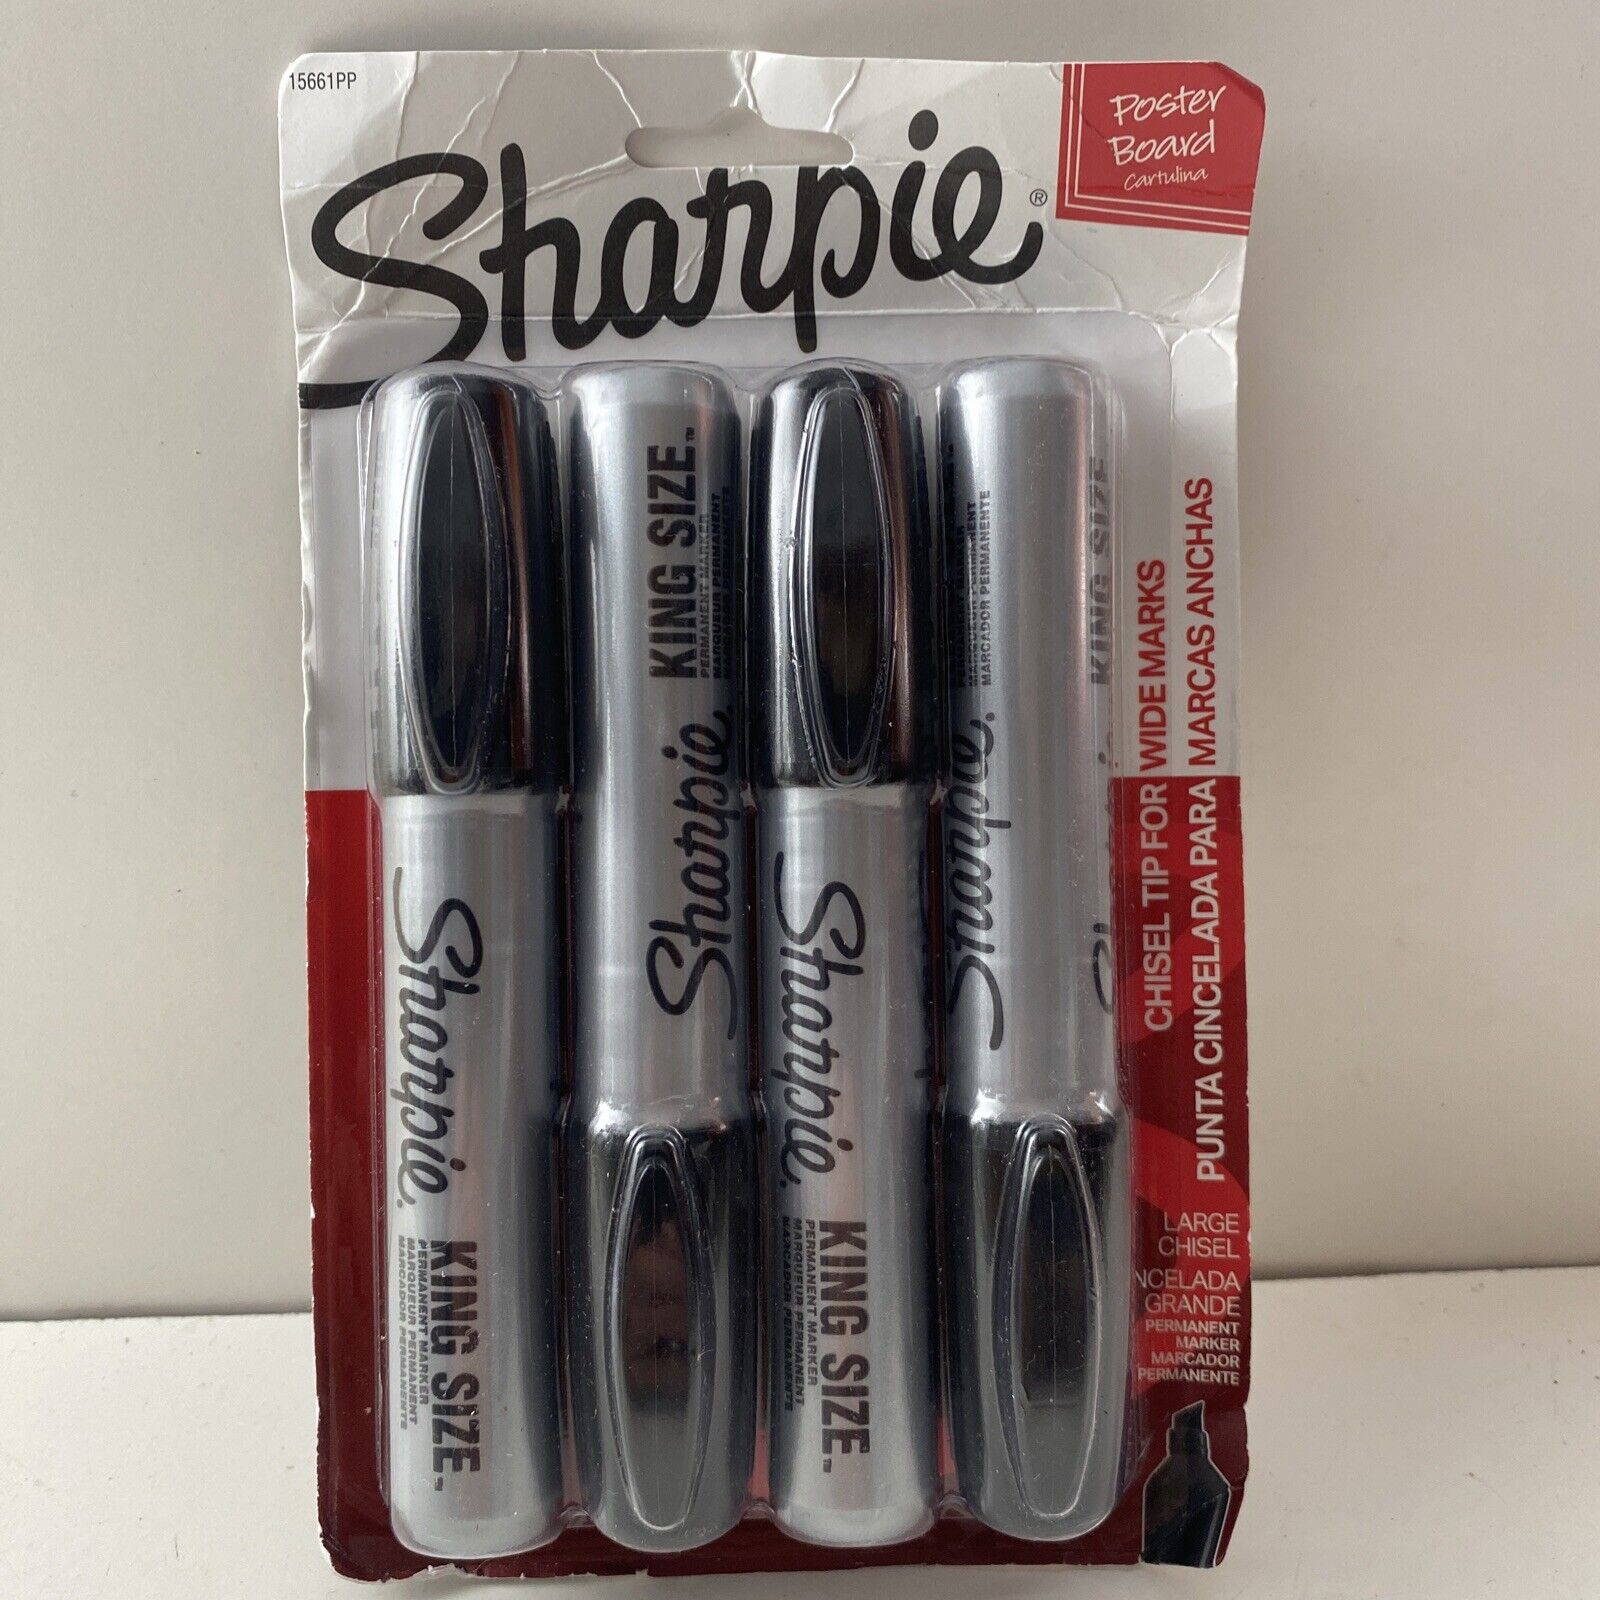 Sharpie: Sharpie King Size, Permanent Markers, Black, Large Chisel, Pack Of 4